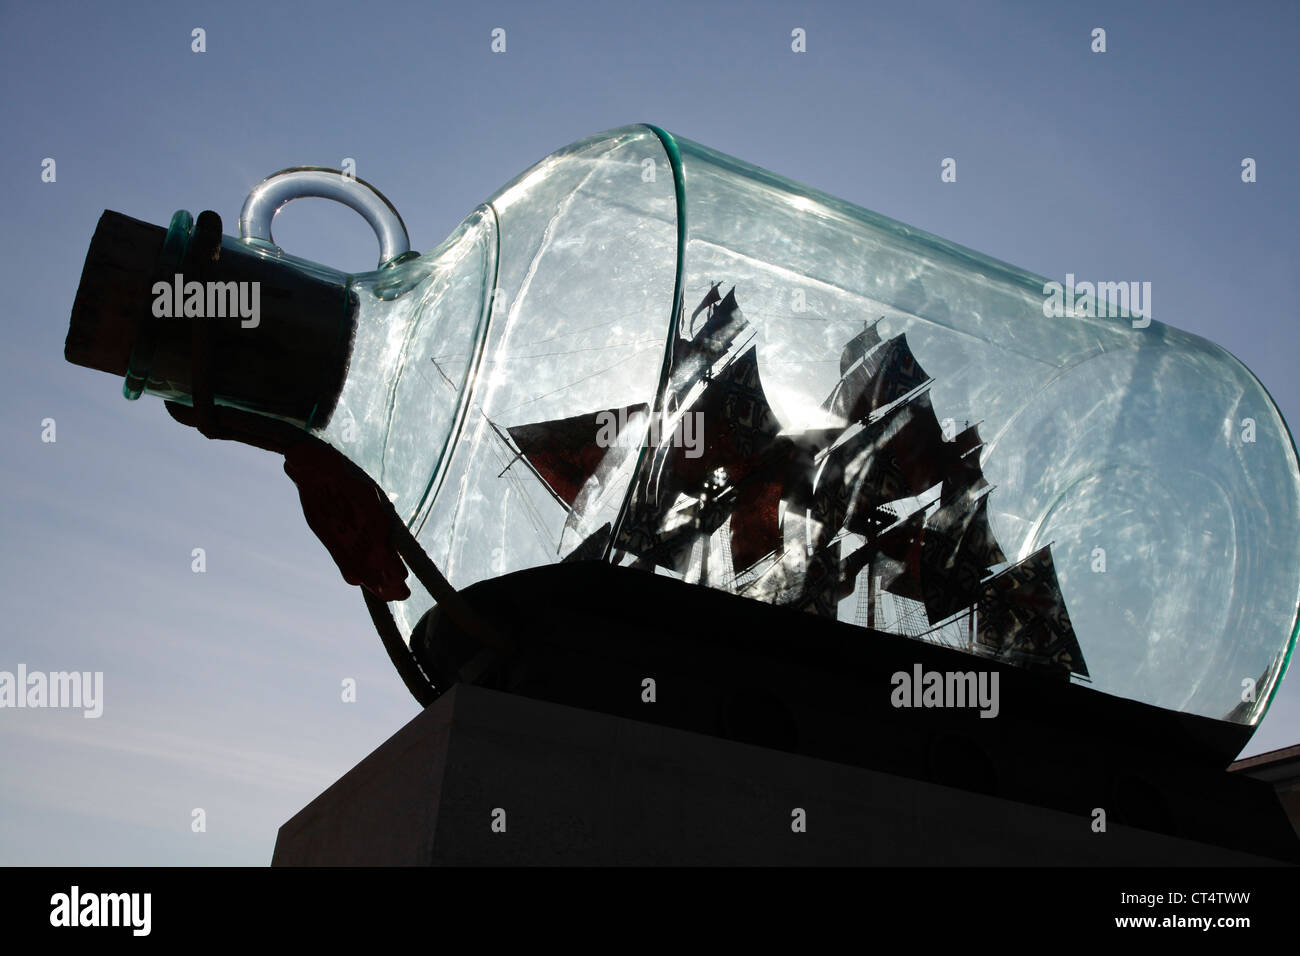 Nelson's ship in a bottle by artist Yinka Shonibare by the Royal Observatory at Greenwich in London, England, UK Stock Photo